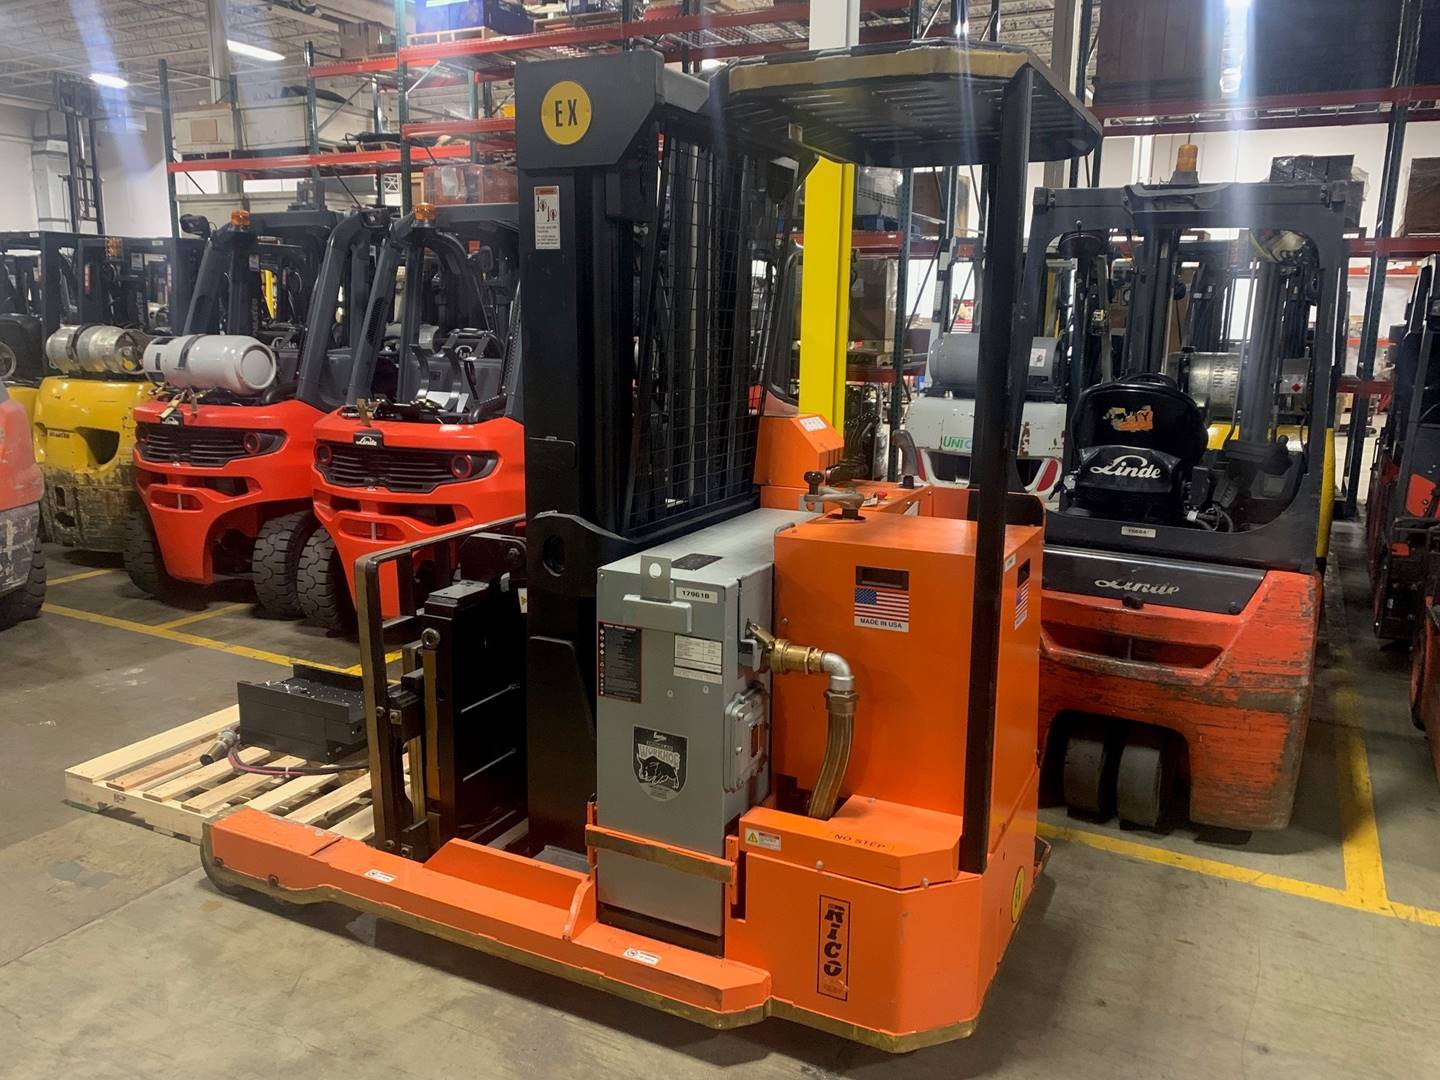 Appliance lift 750 lb hyd rentals Northeastern and Central Pennsylvania,  Where to Rent Appliance lift 750 lb hyd rentals in Scott Township and  Montrose PA